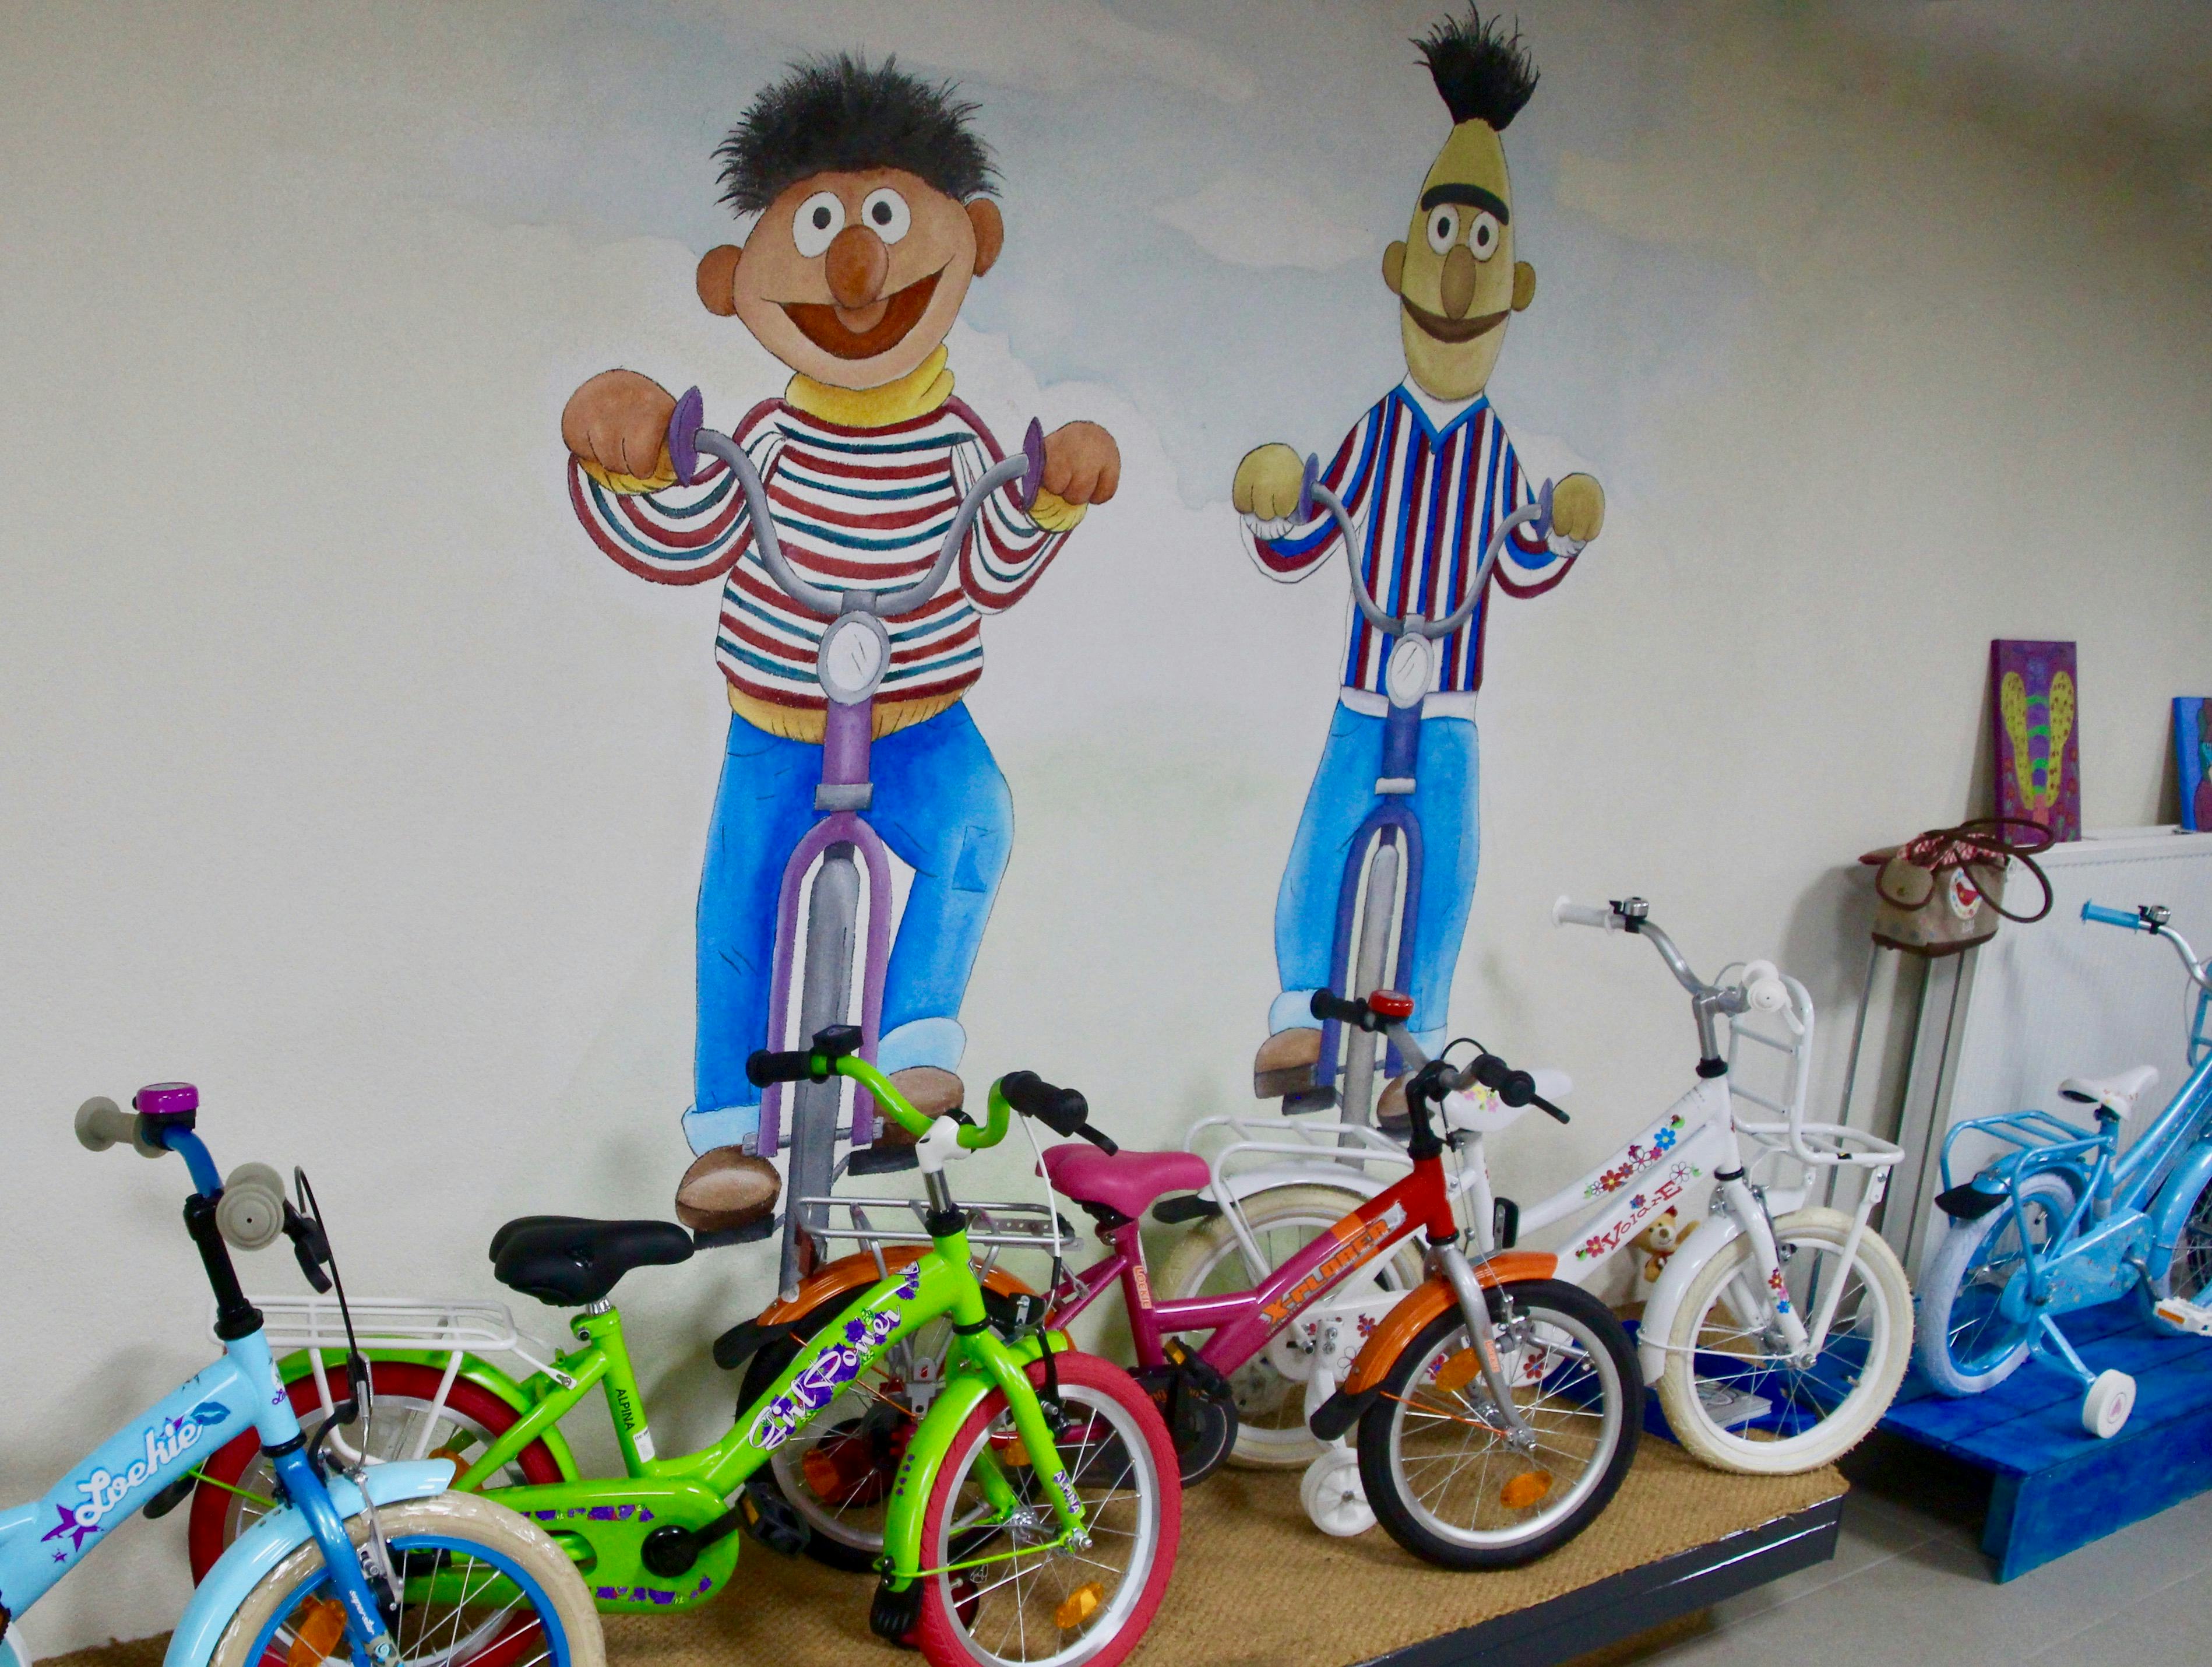 "Create the right experience around the bikes. Make it colourful and show, famous characters."